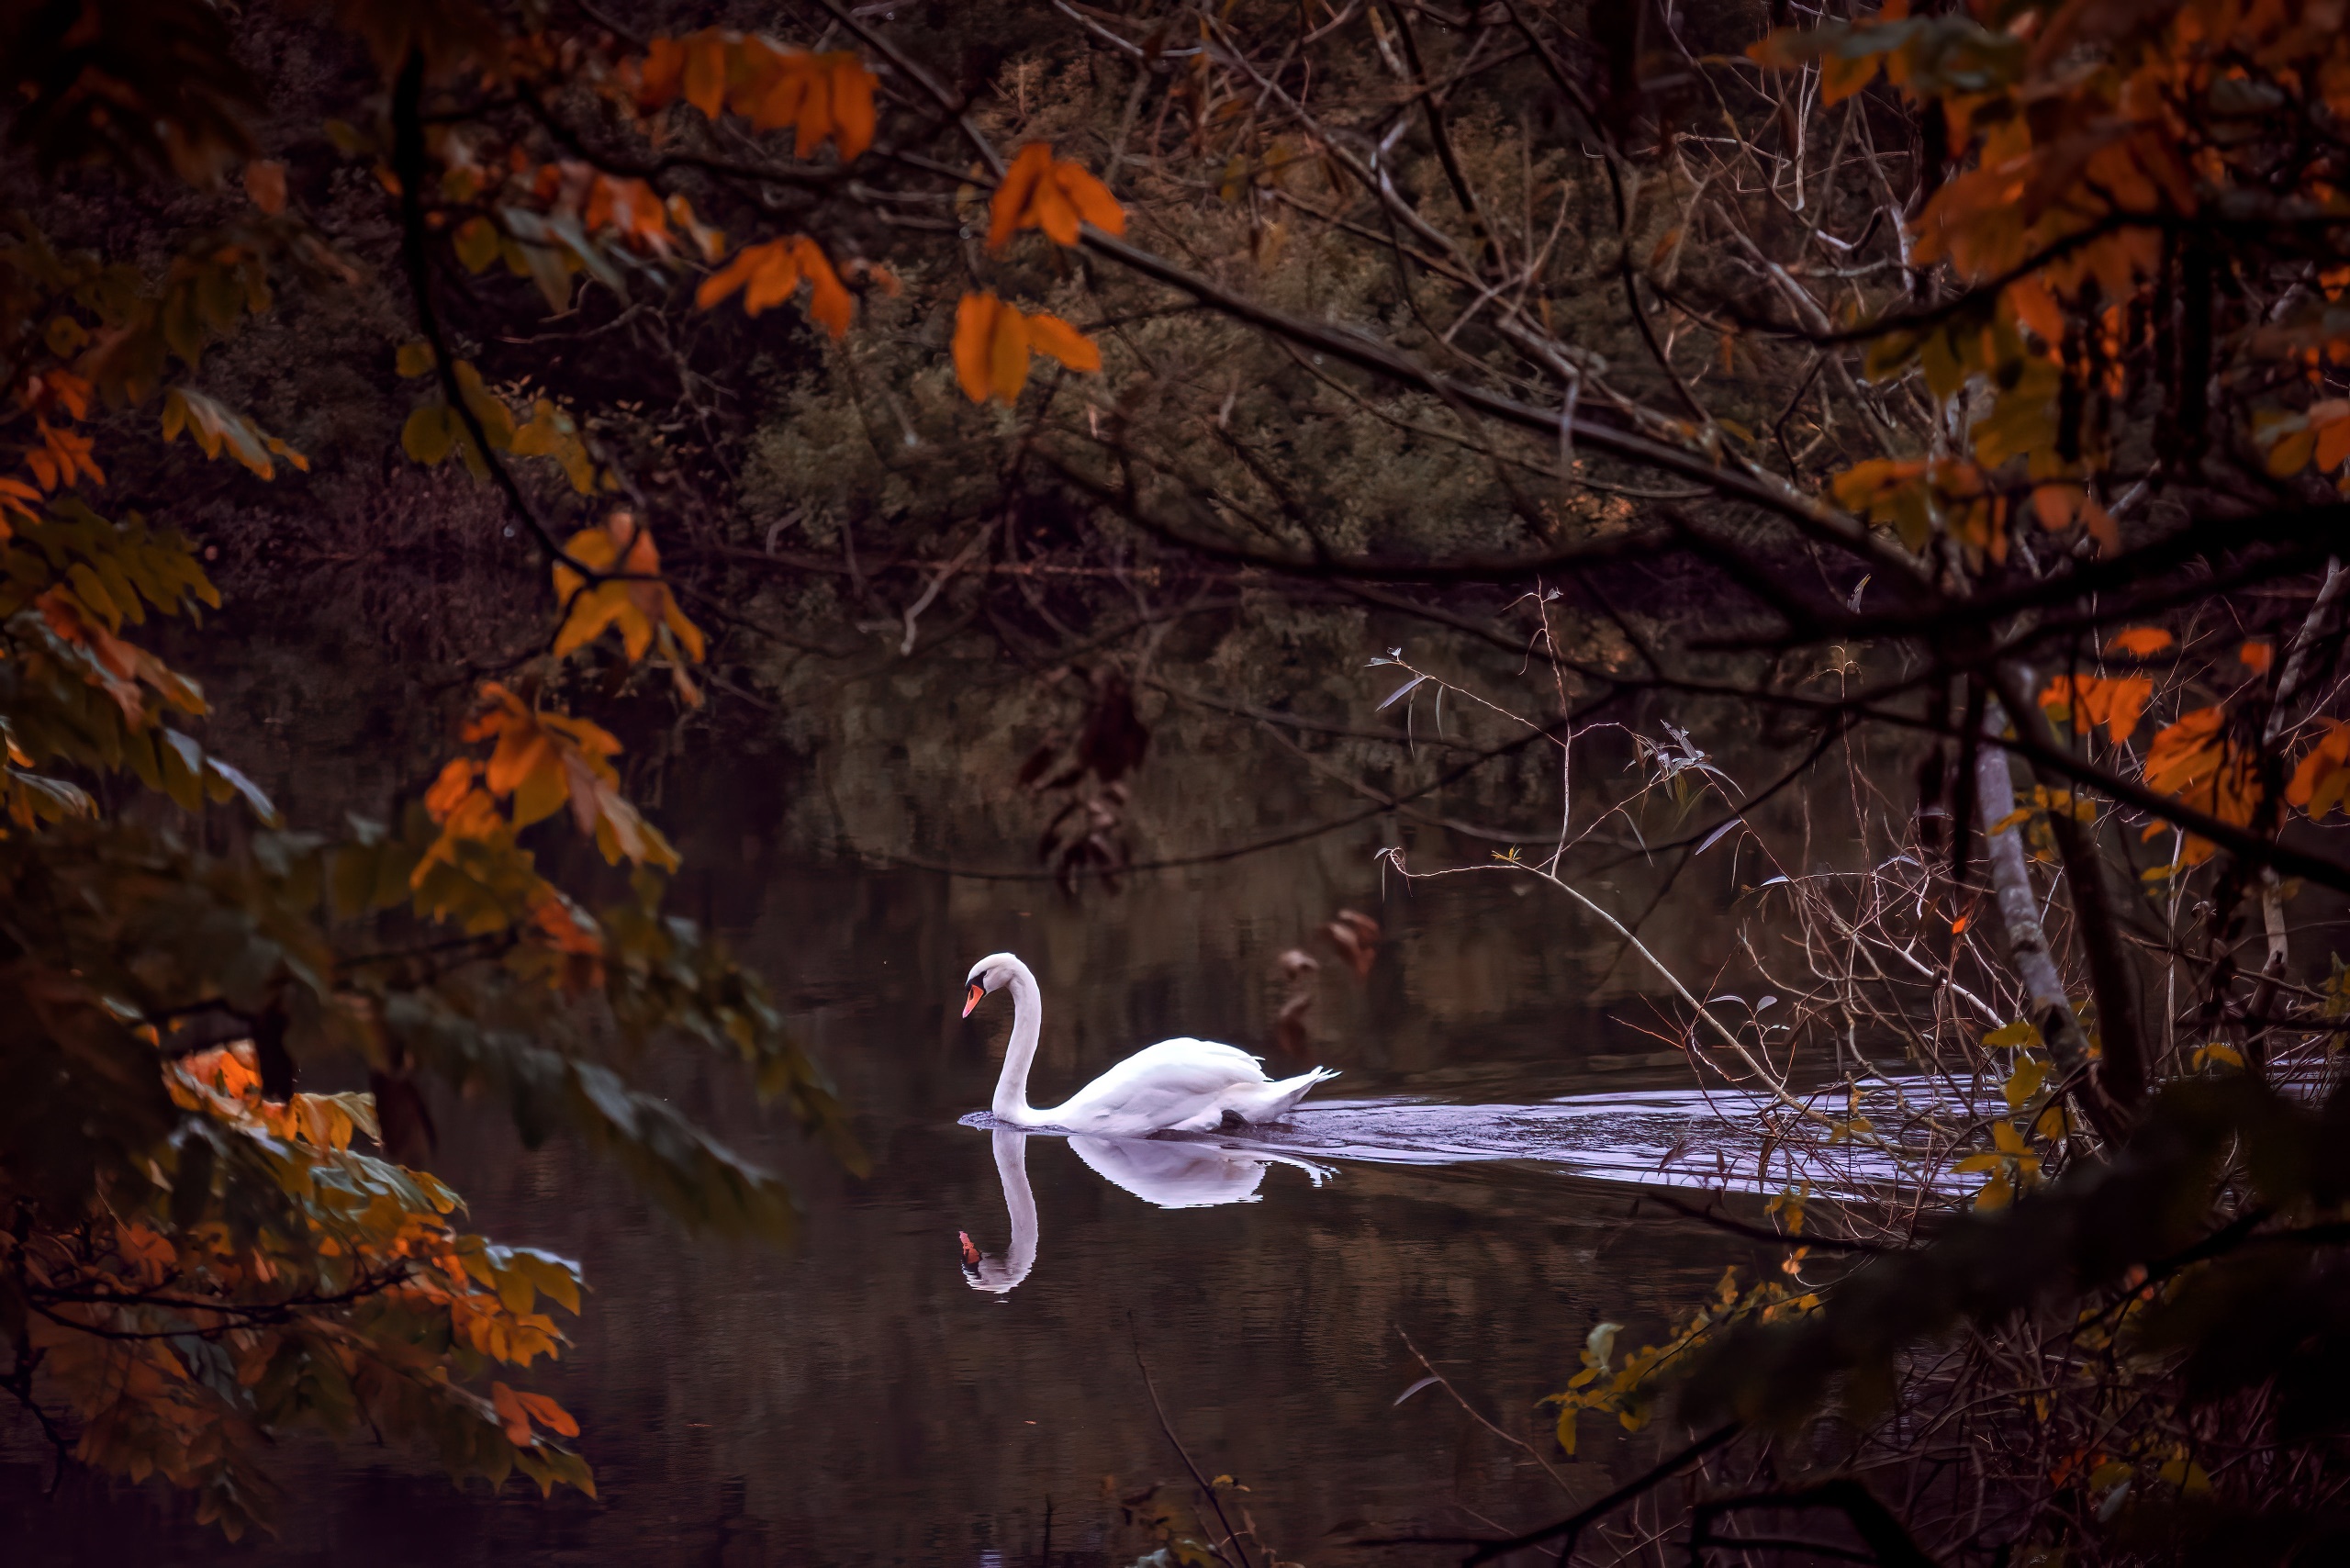 Animals Birds Swan Nature Outdoors Water Trees Leaves Fall Reflection 2560x1708